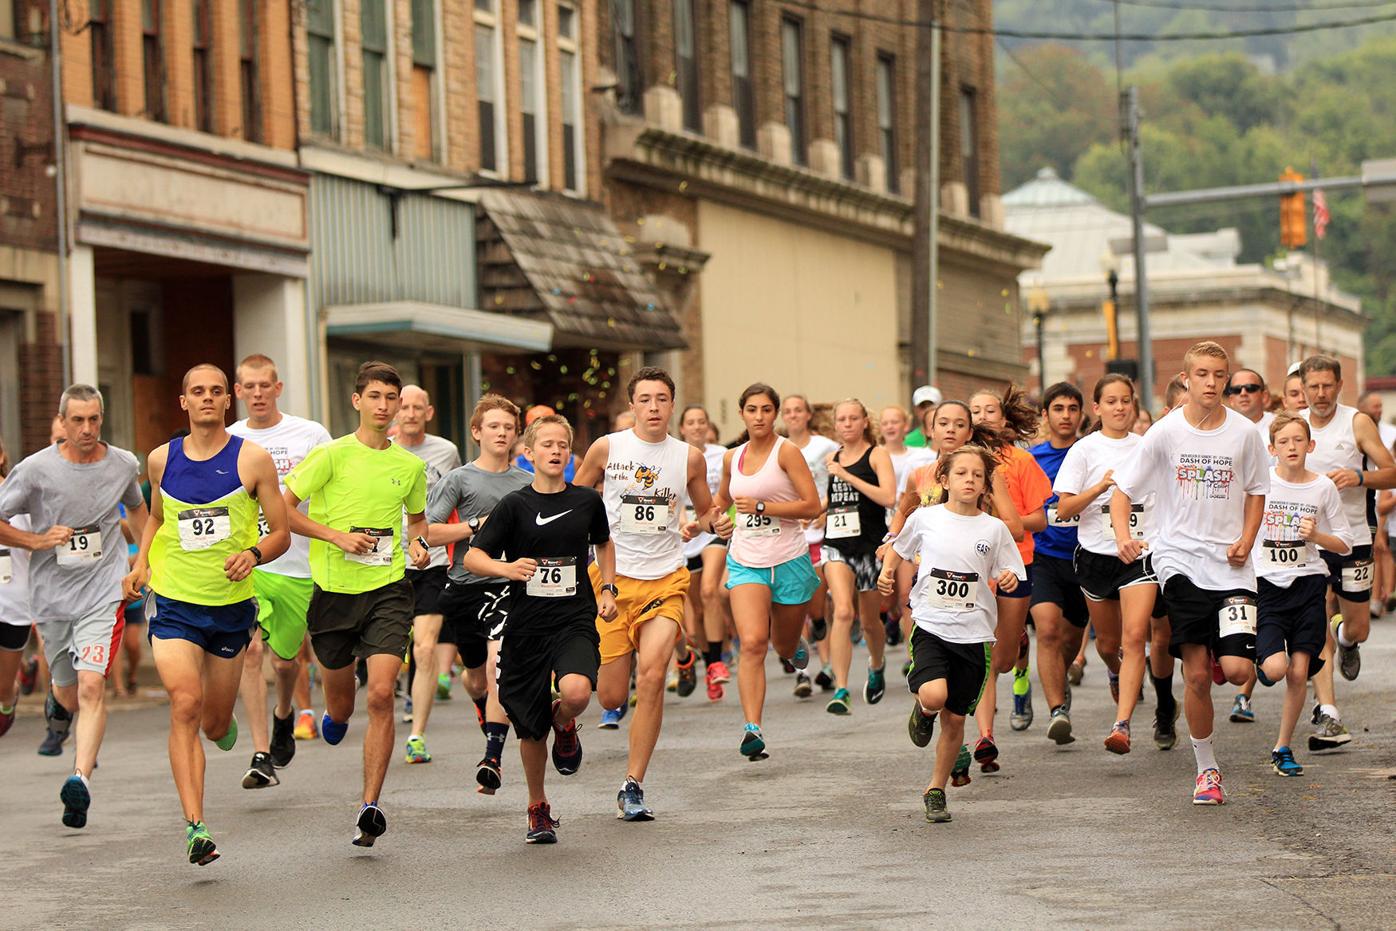 people participating in a running race through a downtown